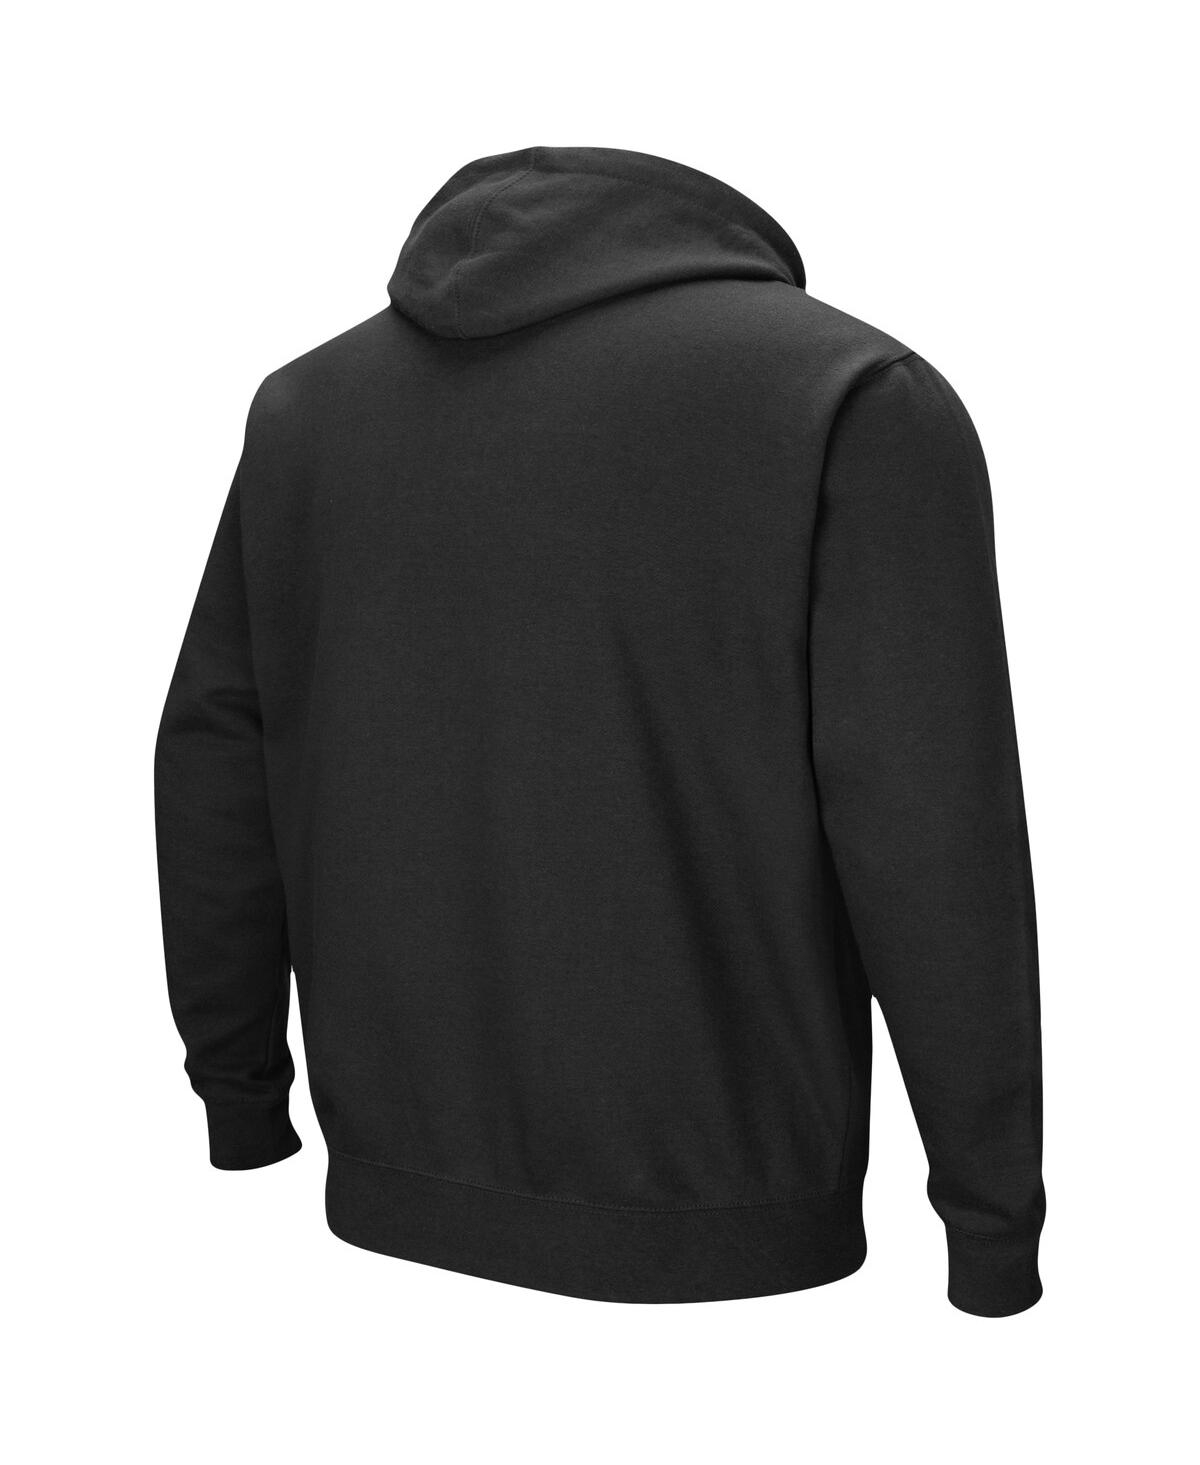 Shop Colosseum Men's  Black Boise State Broncos Arch And Logo 3.0 Pullover Hoodie